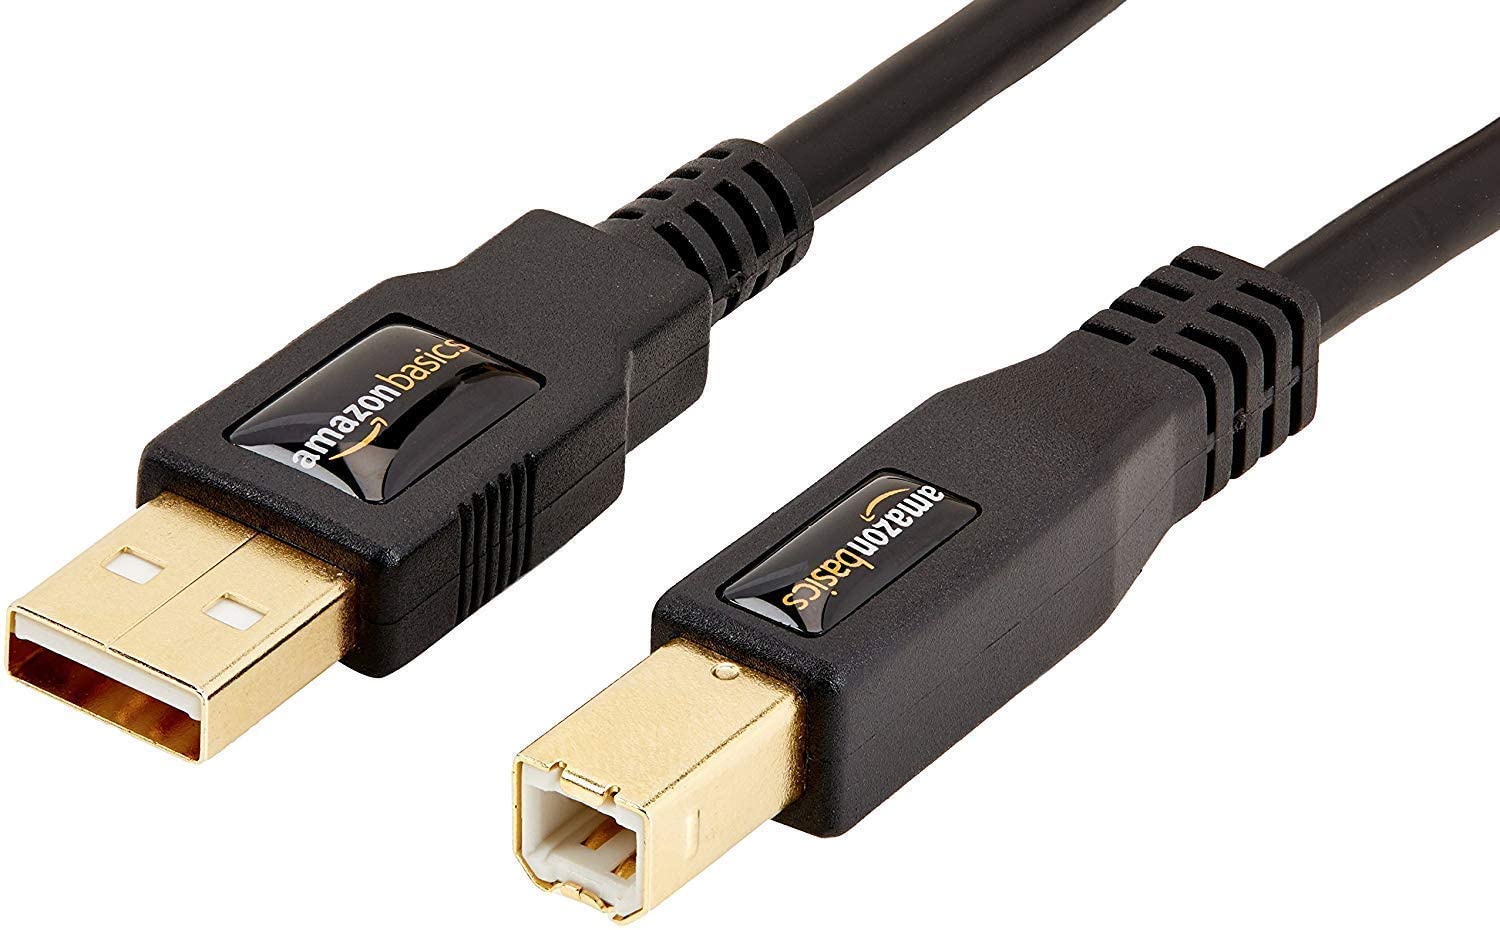  AmazonBasics USB 2.0 Printer Type Cable - A-Male to B-Male-16 Feet (4.8 Meters) uk reviews